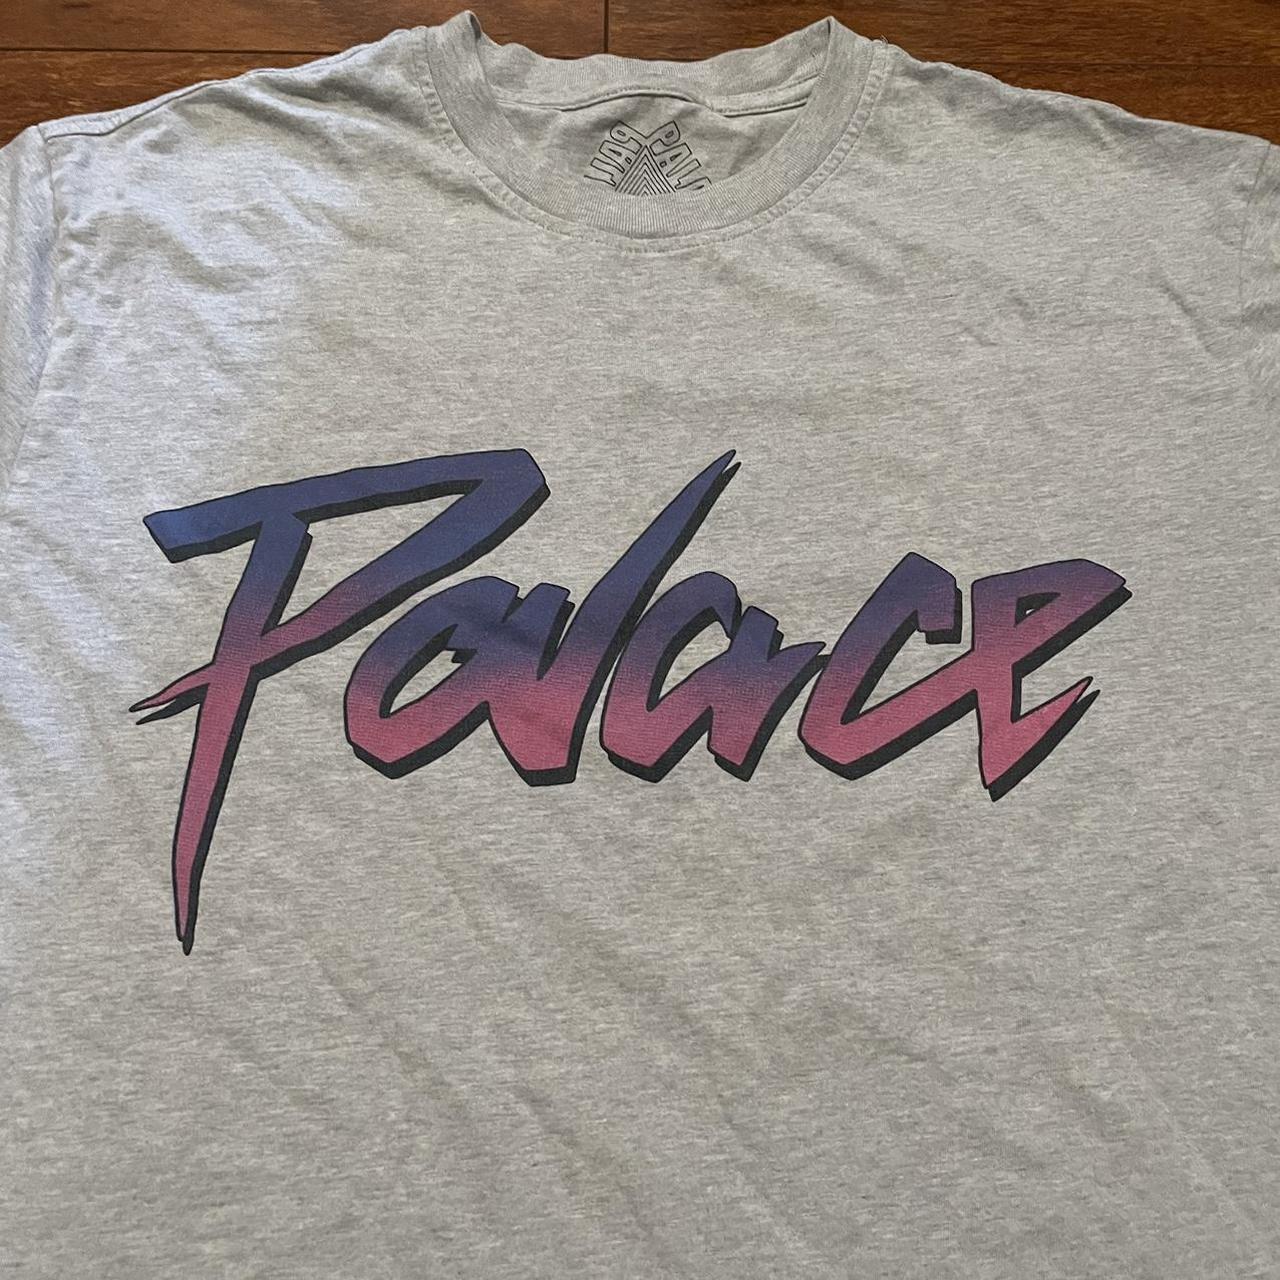 Product Image 2 - Palace Spellout skate shirt. For